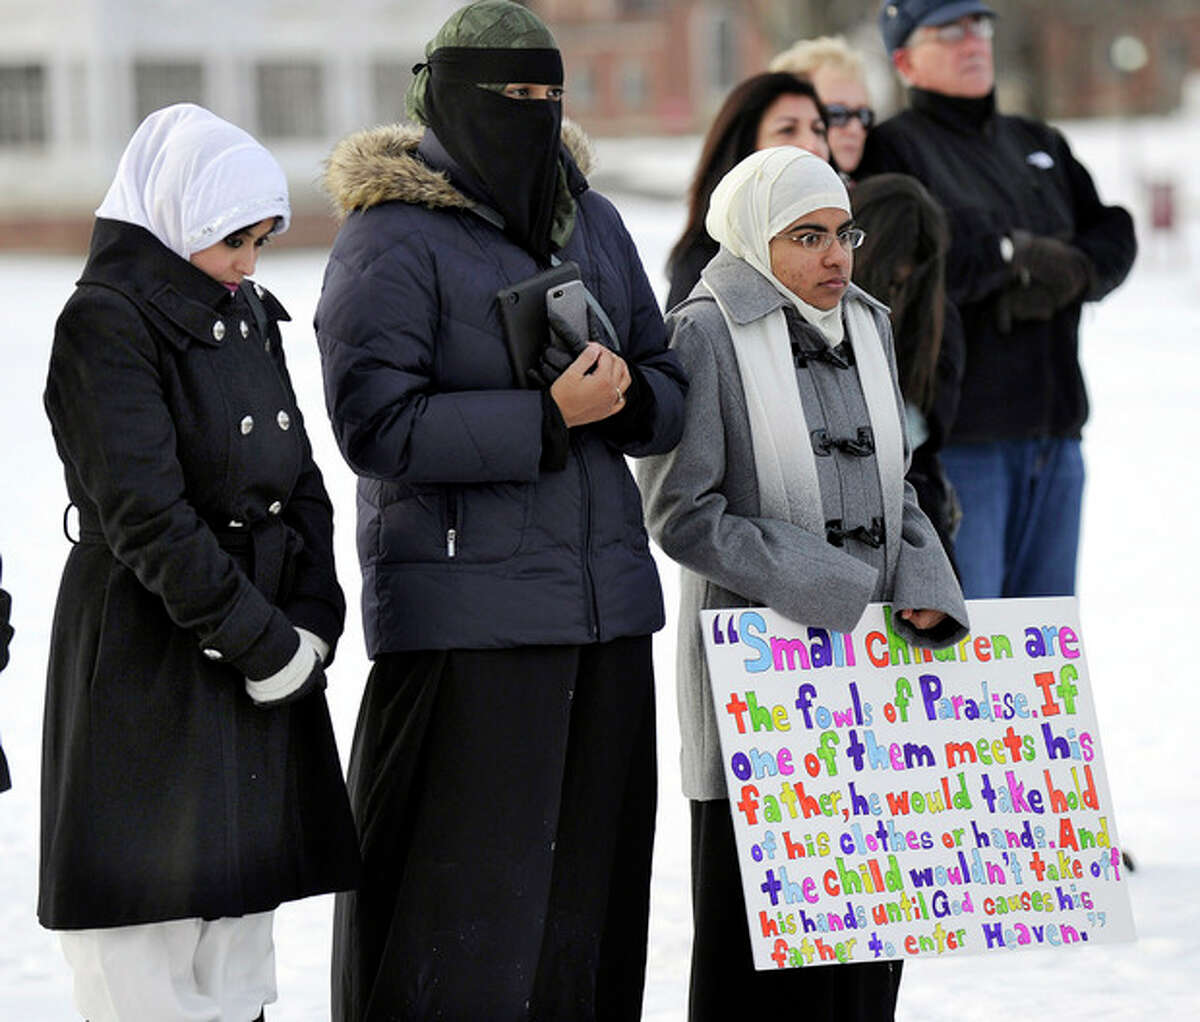 From left, Naveera Karim, Ayesha Akhtar and Anwar Abdulrehman, members of the Islamic Society of Western Connecticut, attend an interfaith prayer vigil to remember the victims of the Sandy Hook elementary school shootings Friday, Dec. 28, 2012 in Newtown, Conn. Friday morning marked two weeks since a gunman killed 20 children and six educators at the Sandy Hook Elementary School. (AP Photo/Danbury News-Times, Carol Kaliff)